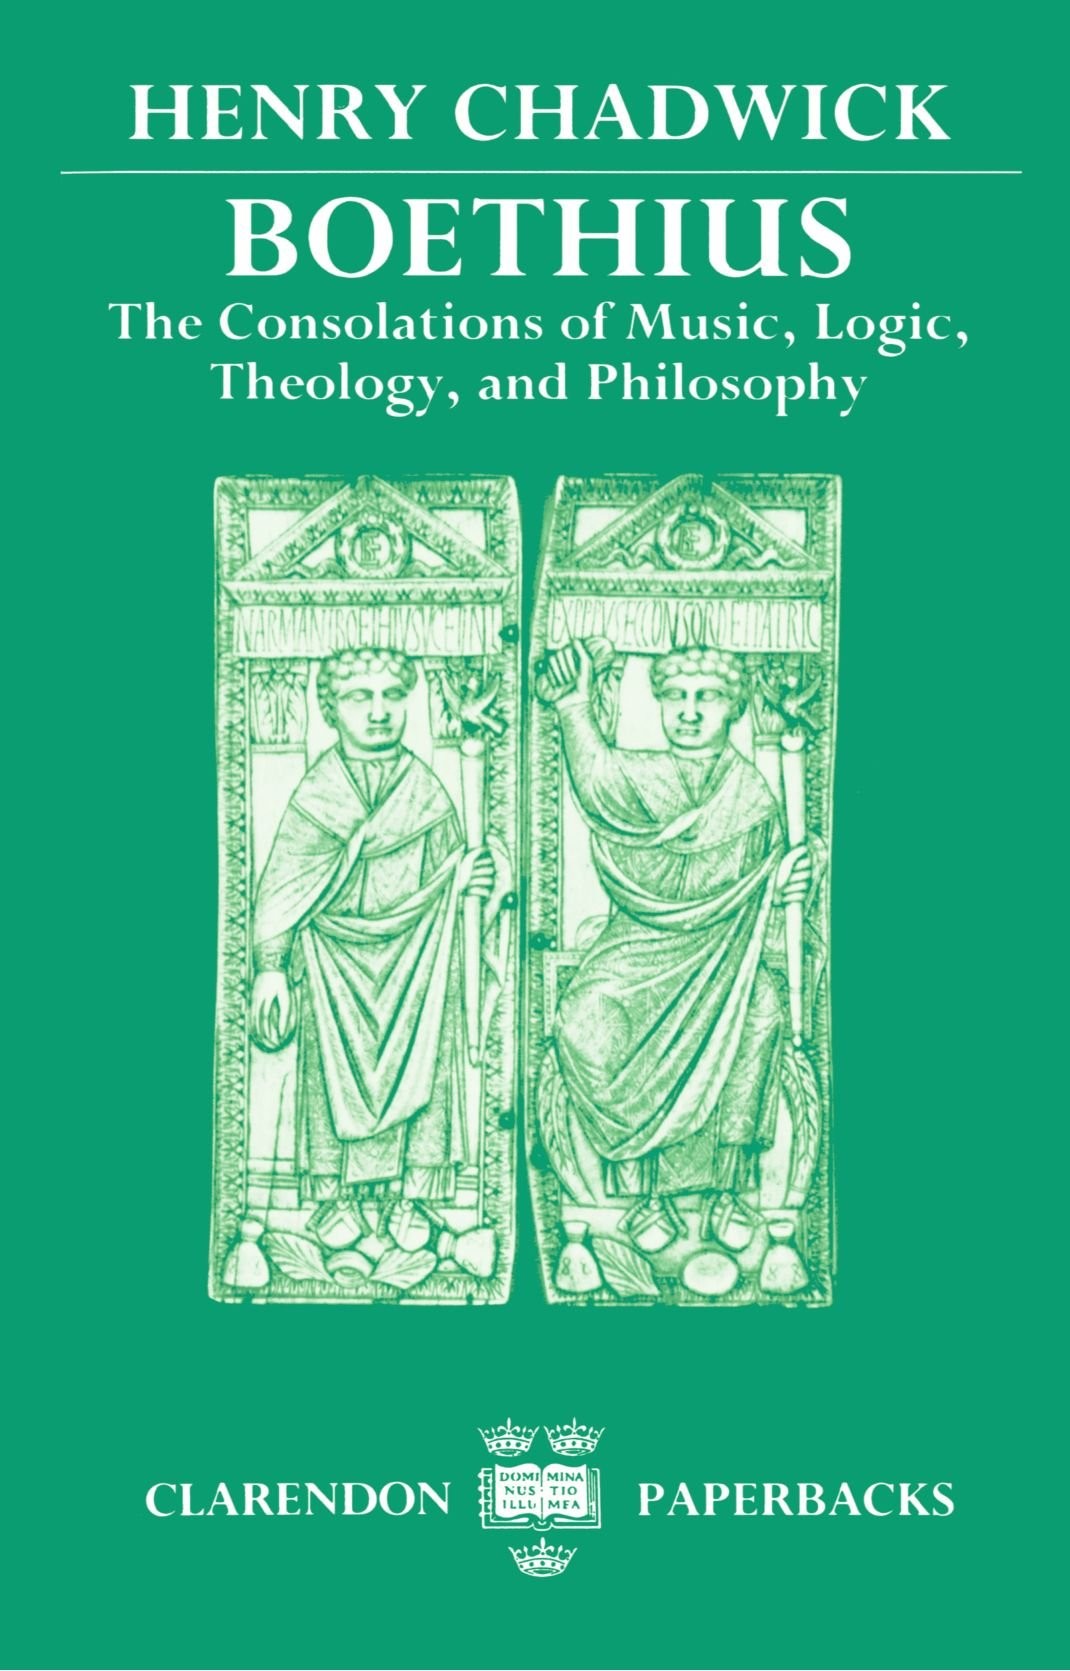 Boethius: The Consolations of Music, Logic, Theology, and Philosophy